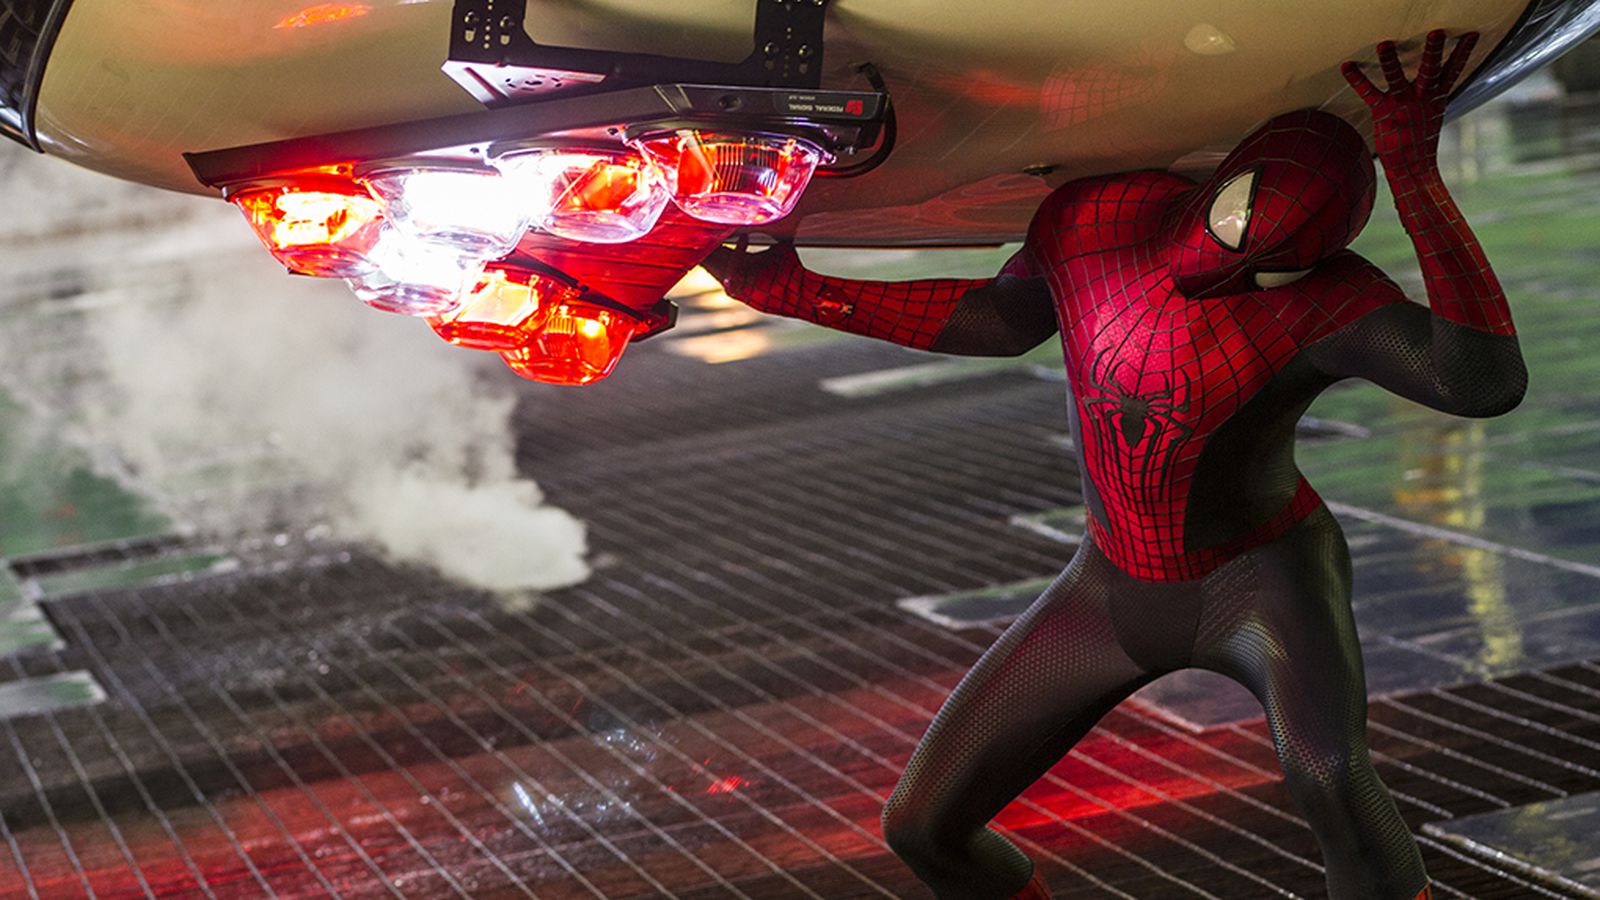 The Amazing Spider-Man 2' review: a step in the wrong direction